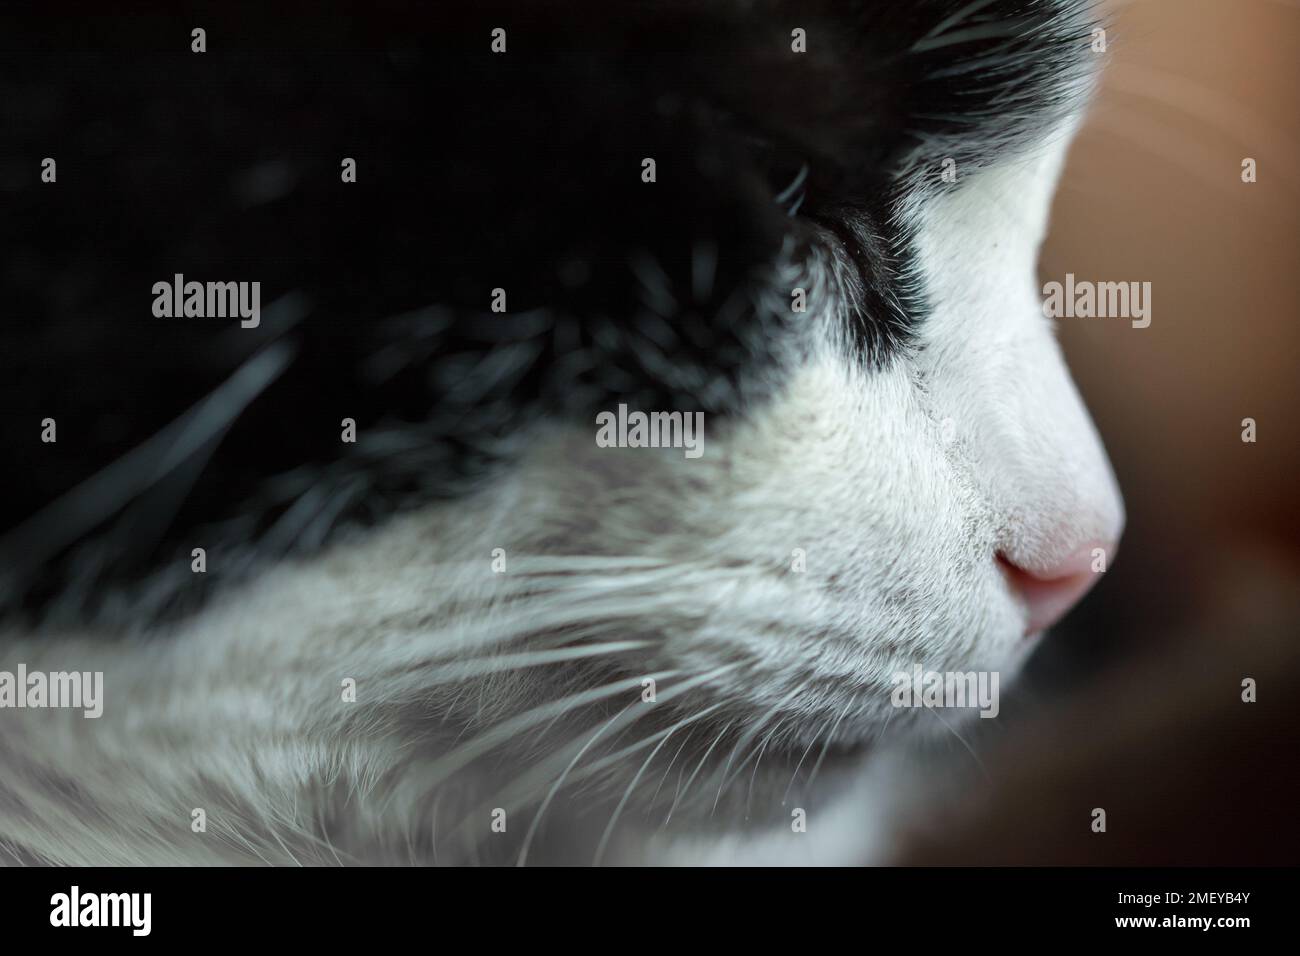 Profile of black and white cat's face with closed eyes Stock Photo